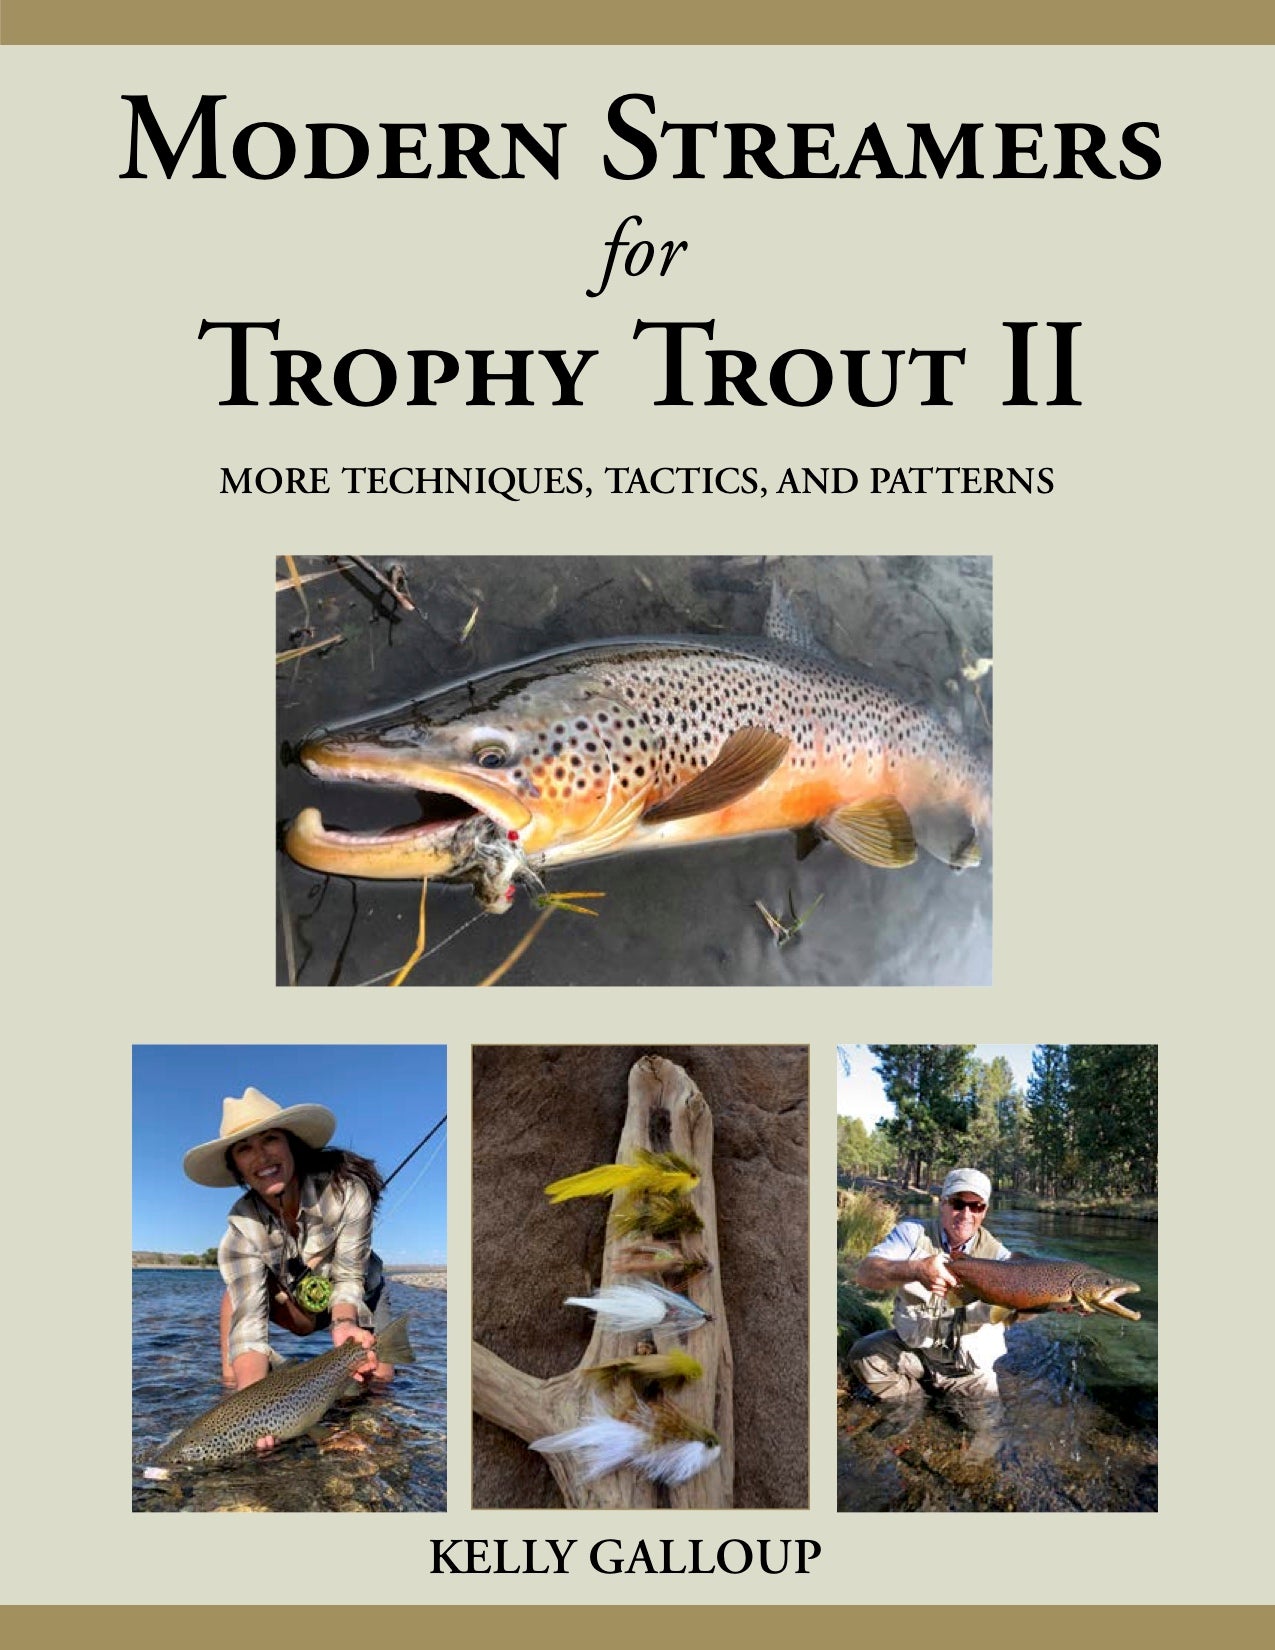 Kelly Galloup's Modern Streamers for Trophy Trout II